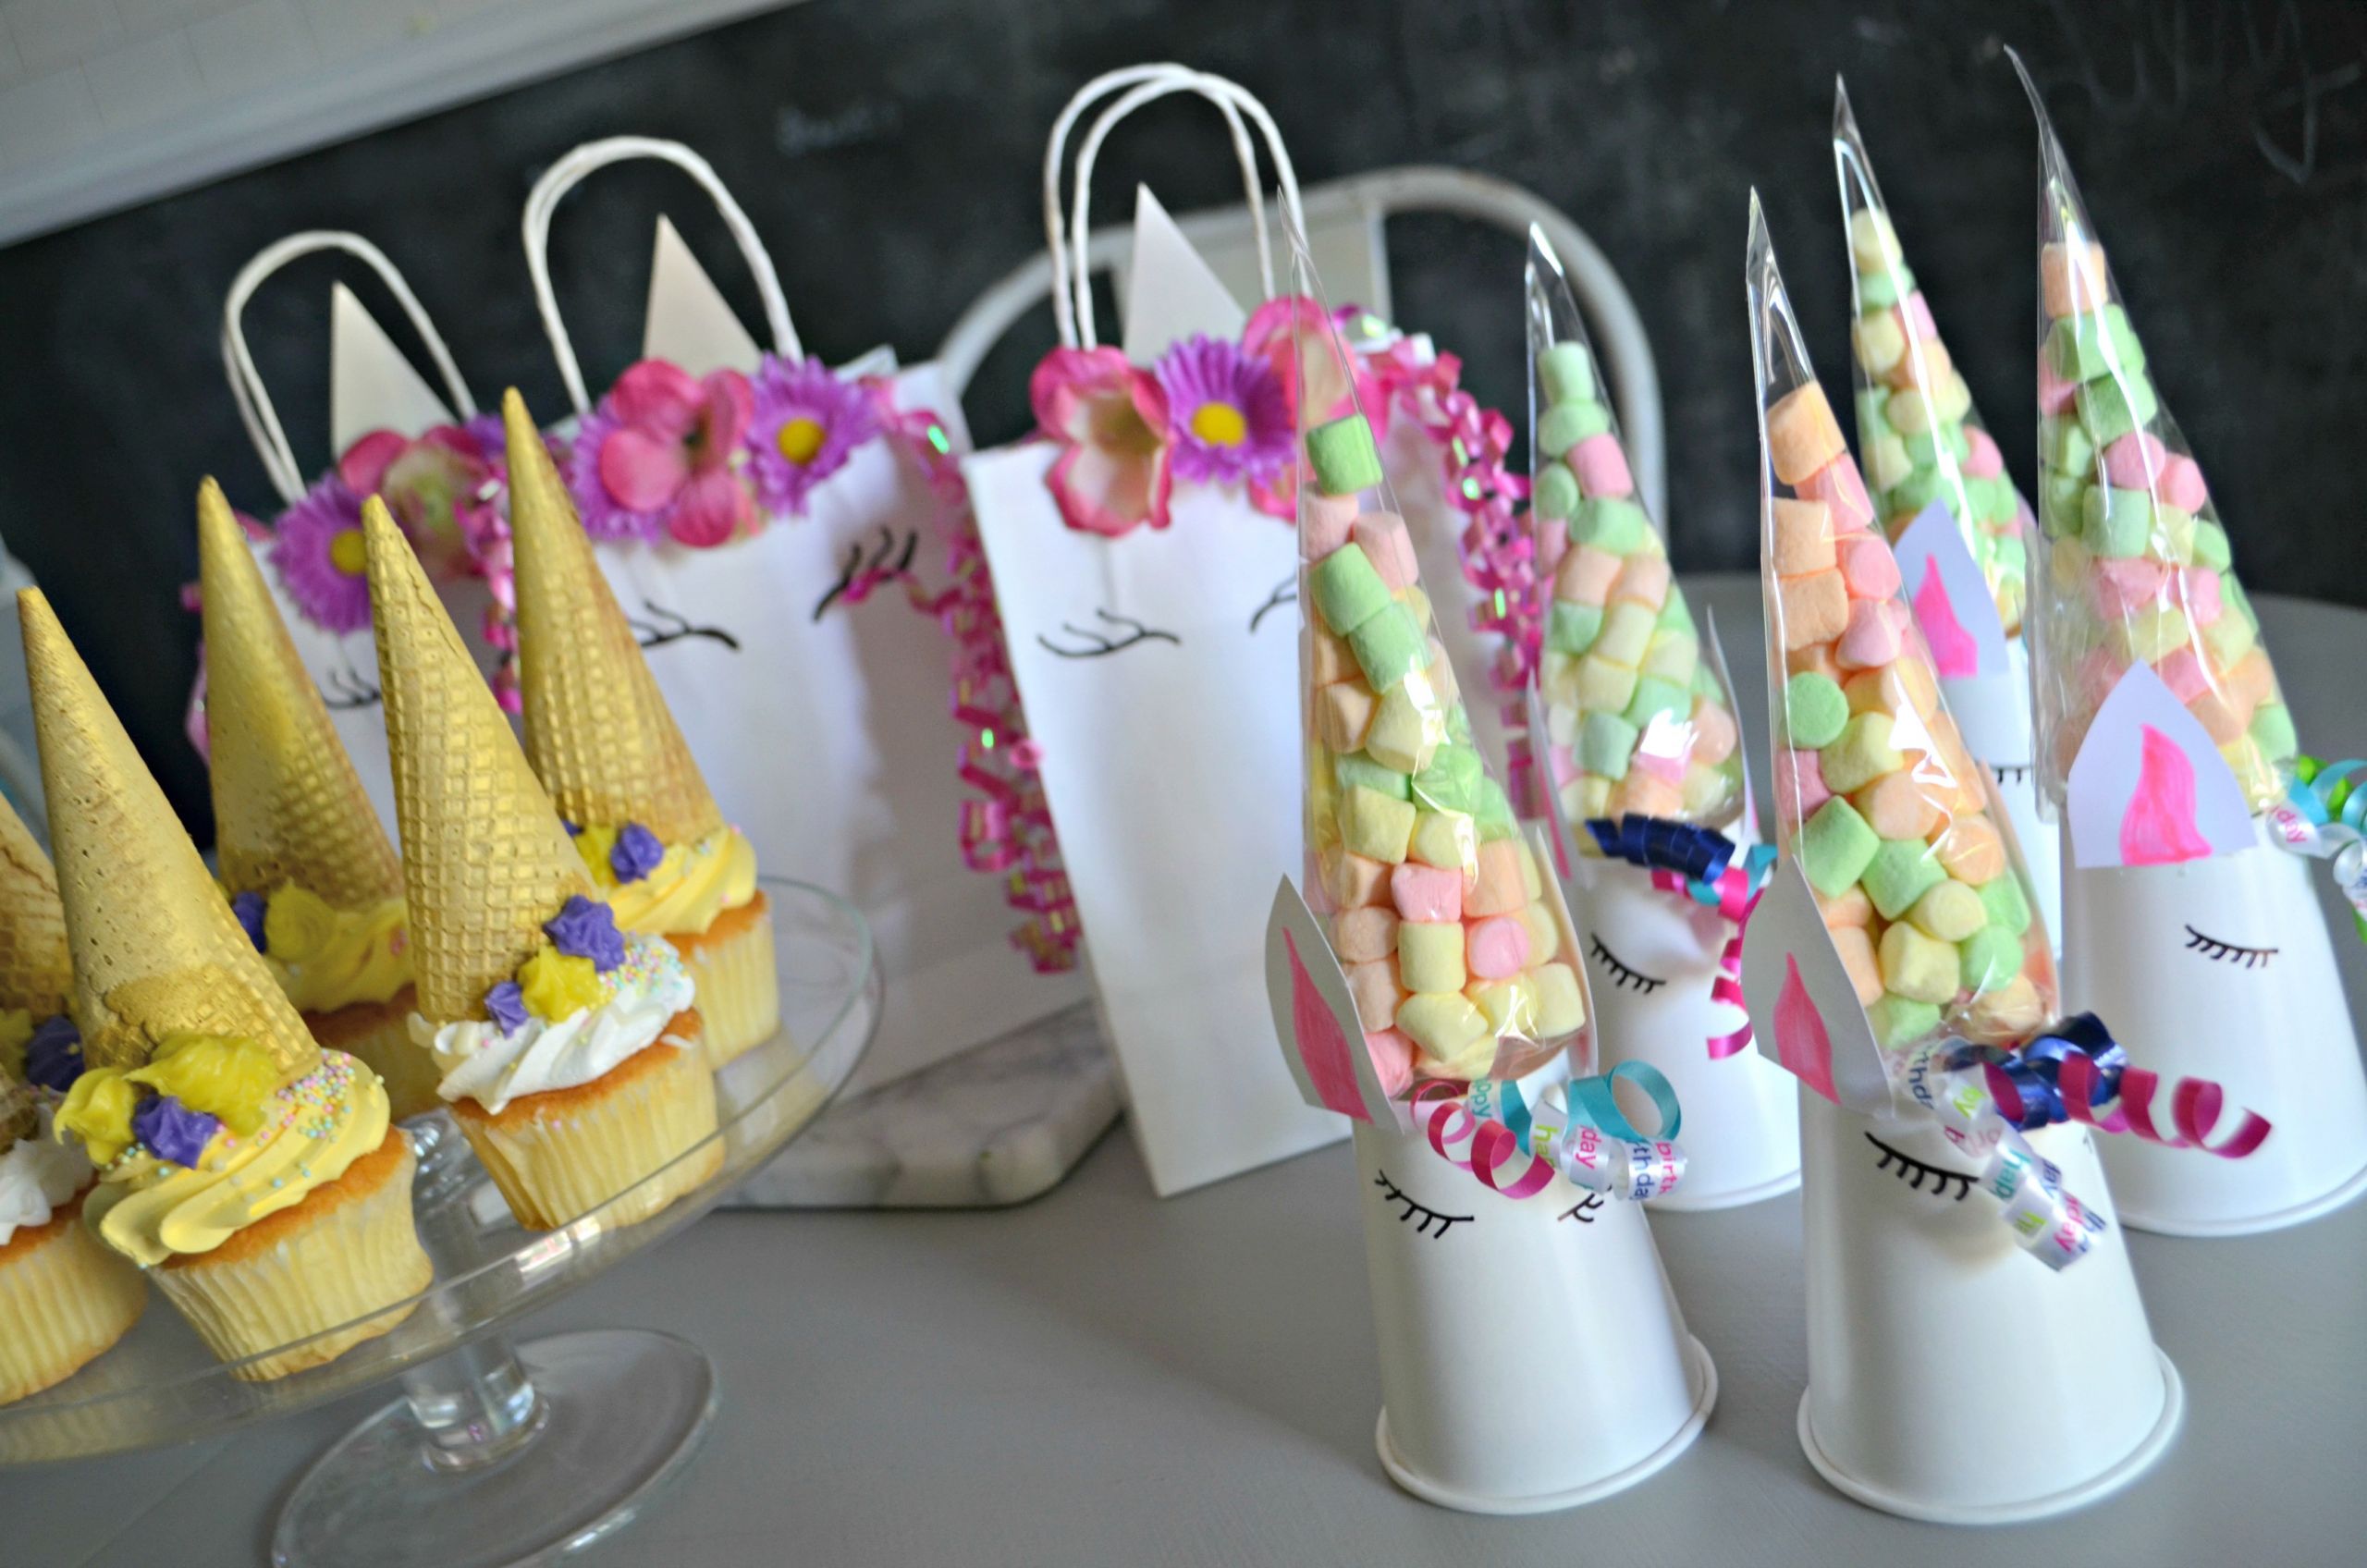 Unicorn Food Ideas For Party
 Top 10 Unicorn Theme Party Ideas and Tips